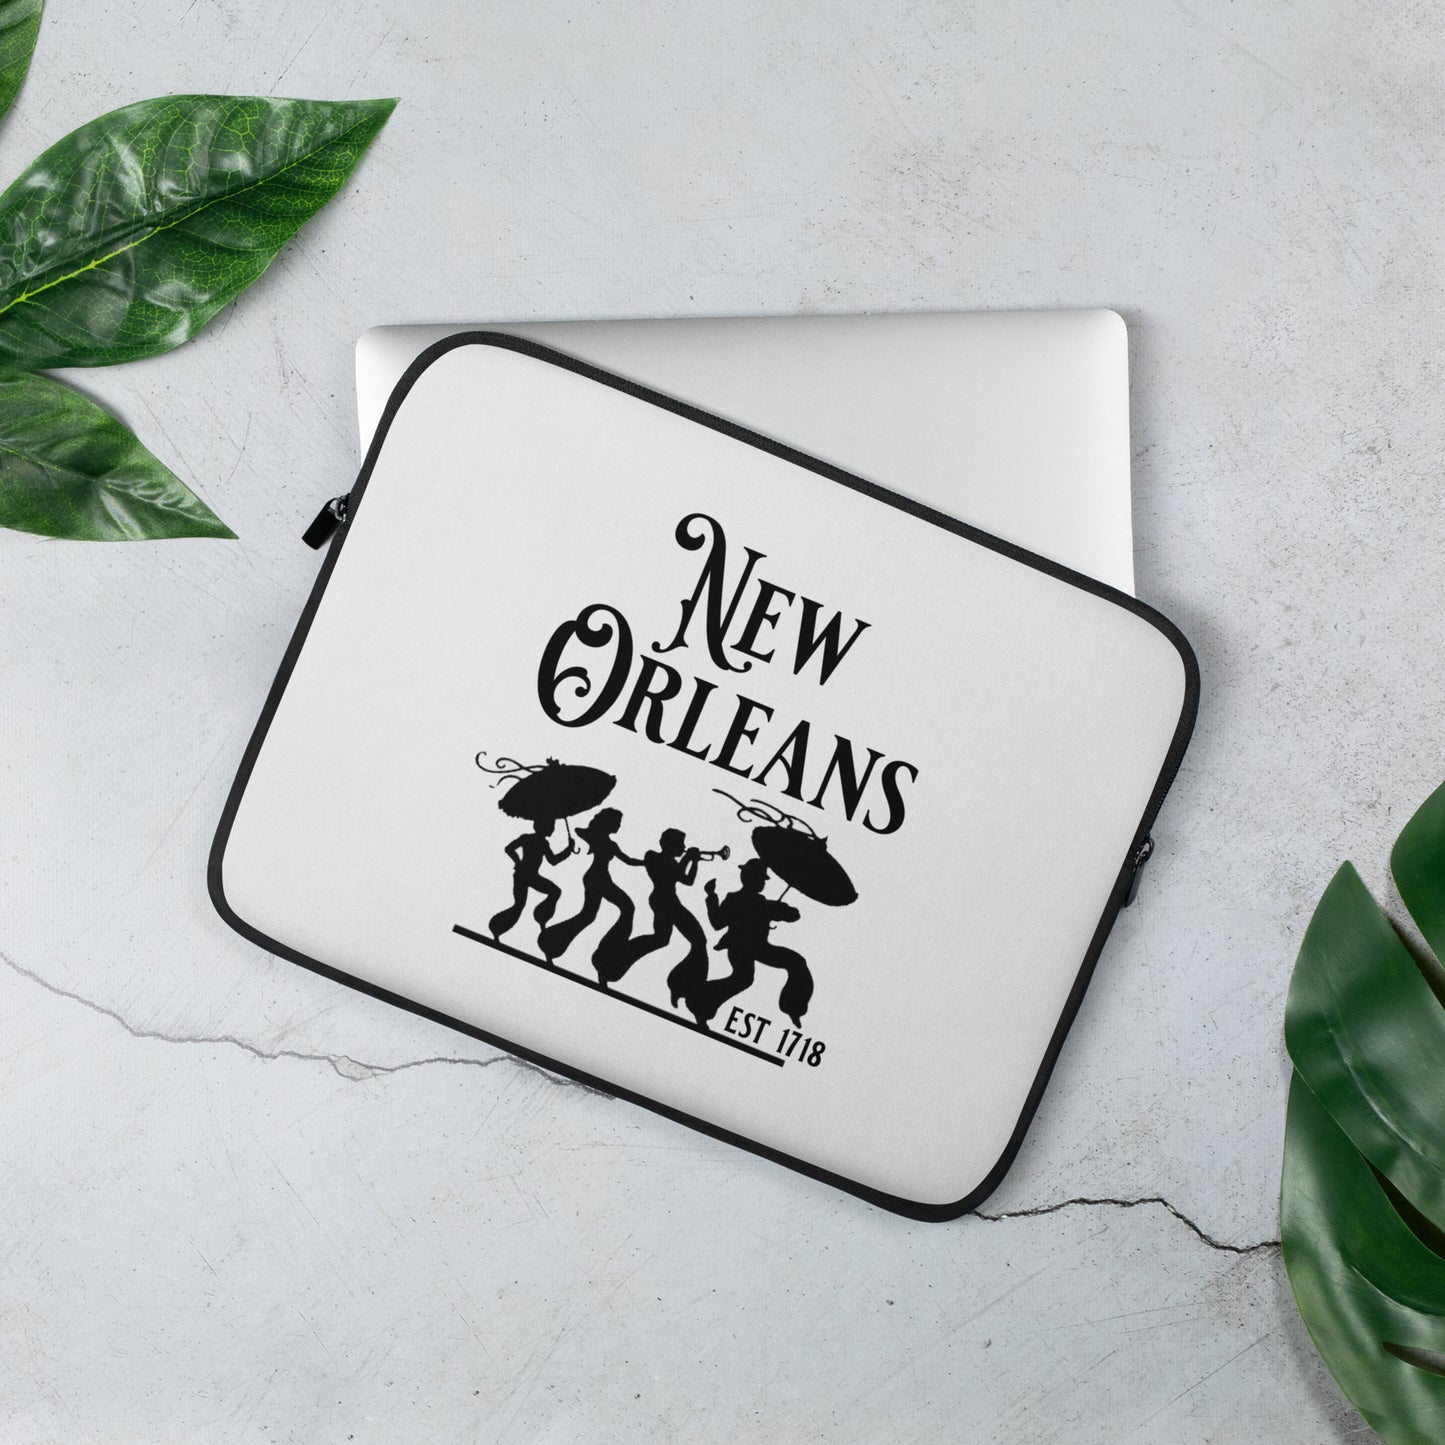 New Orleans Laptop Sleeve Case